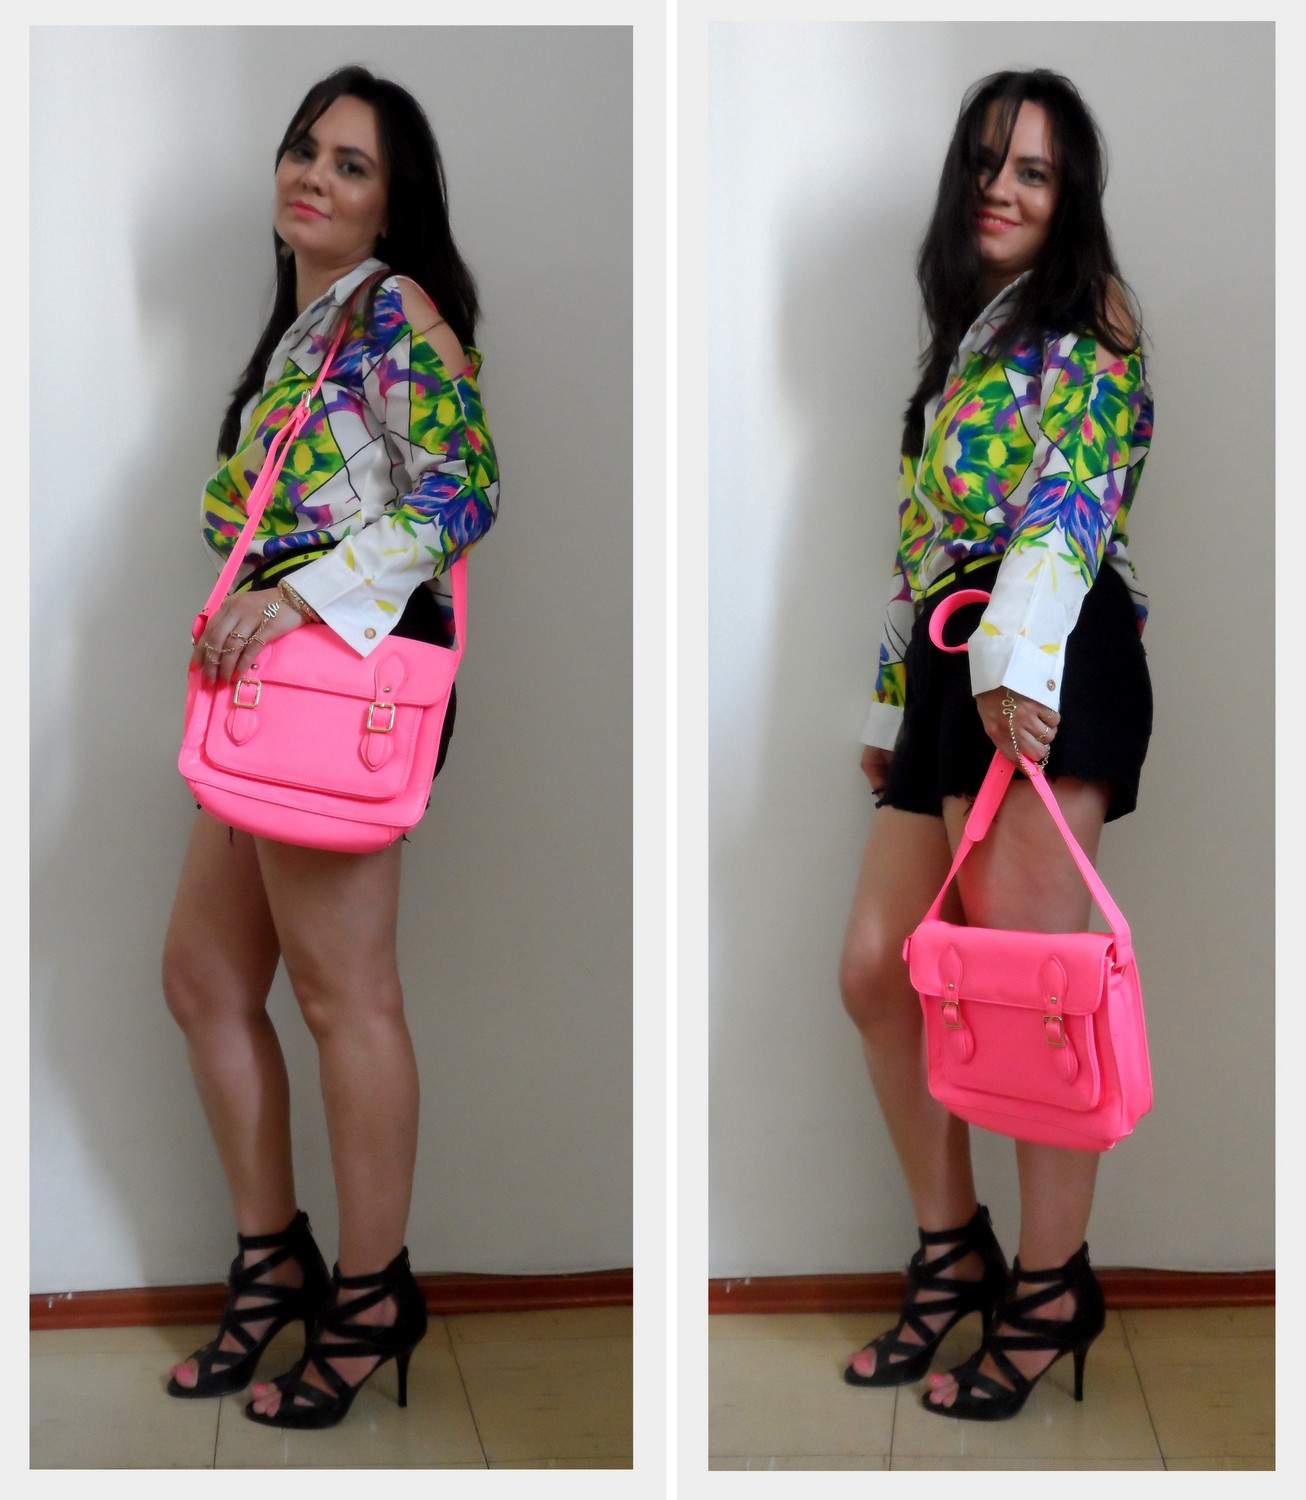 Look - Floral Print, Neon and Black